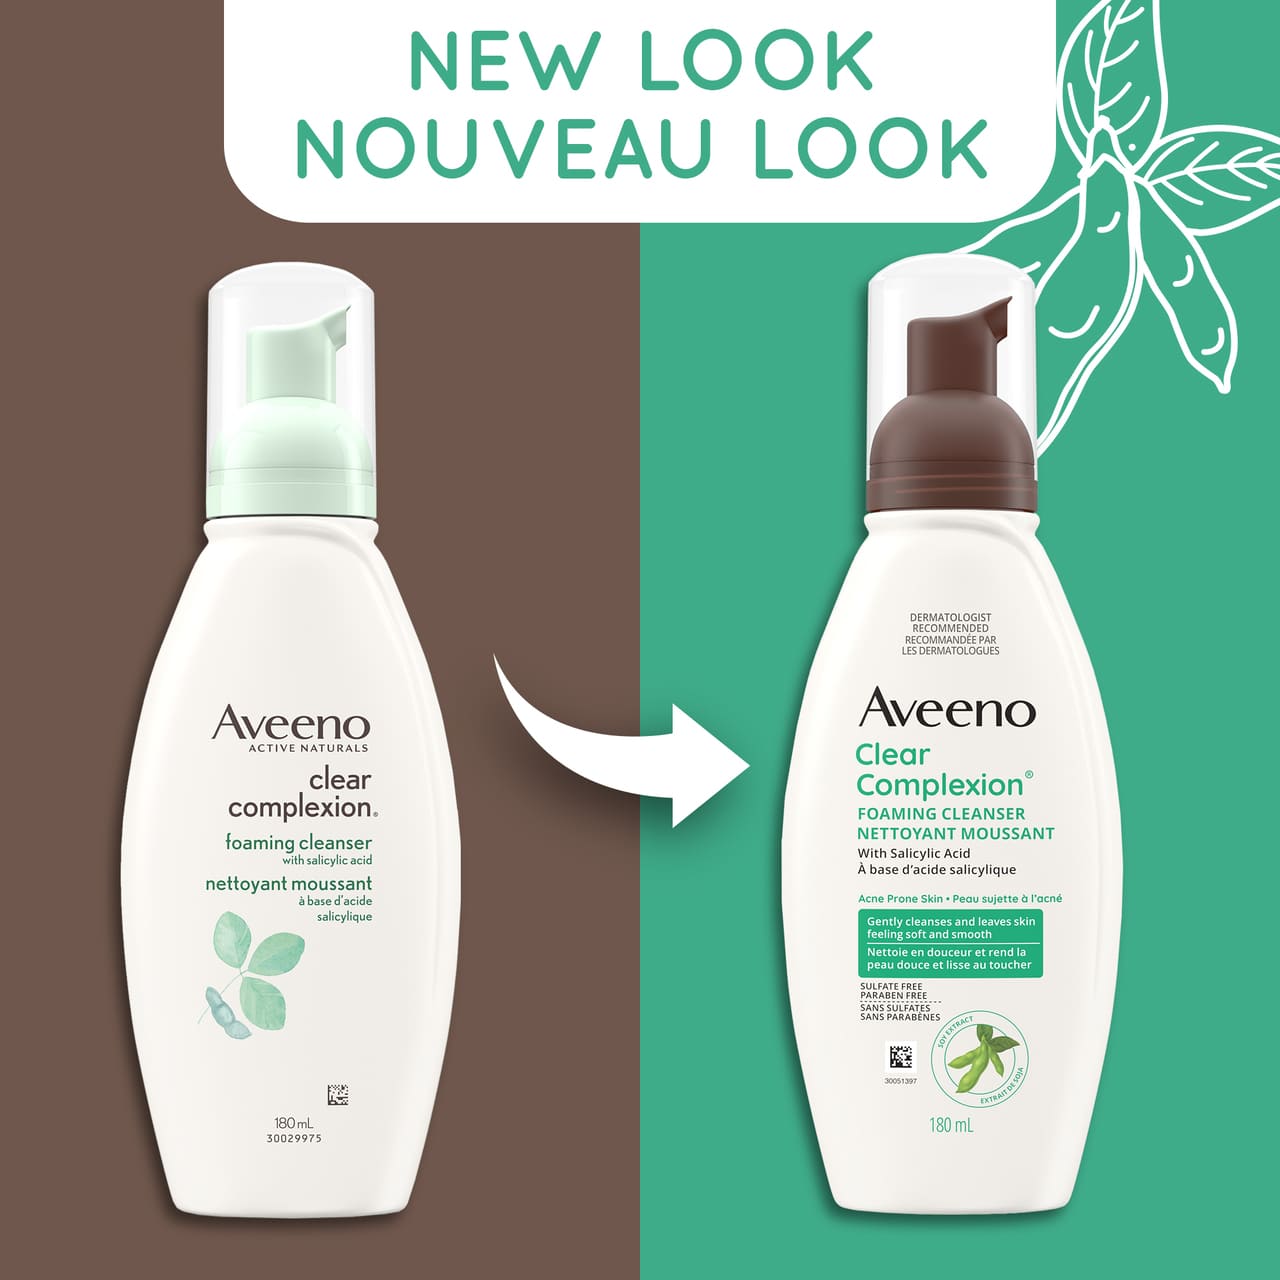 Old and new packaging of AVEENO® Clear Complexion Foaming Cleanser,  180 mL bottles, with text 'new look'